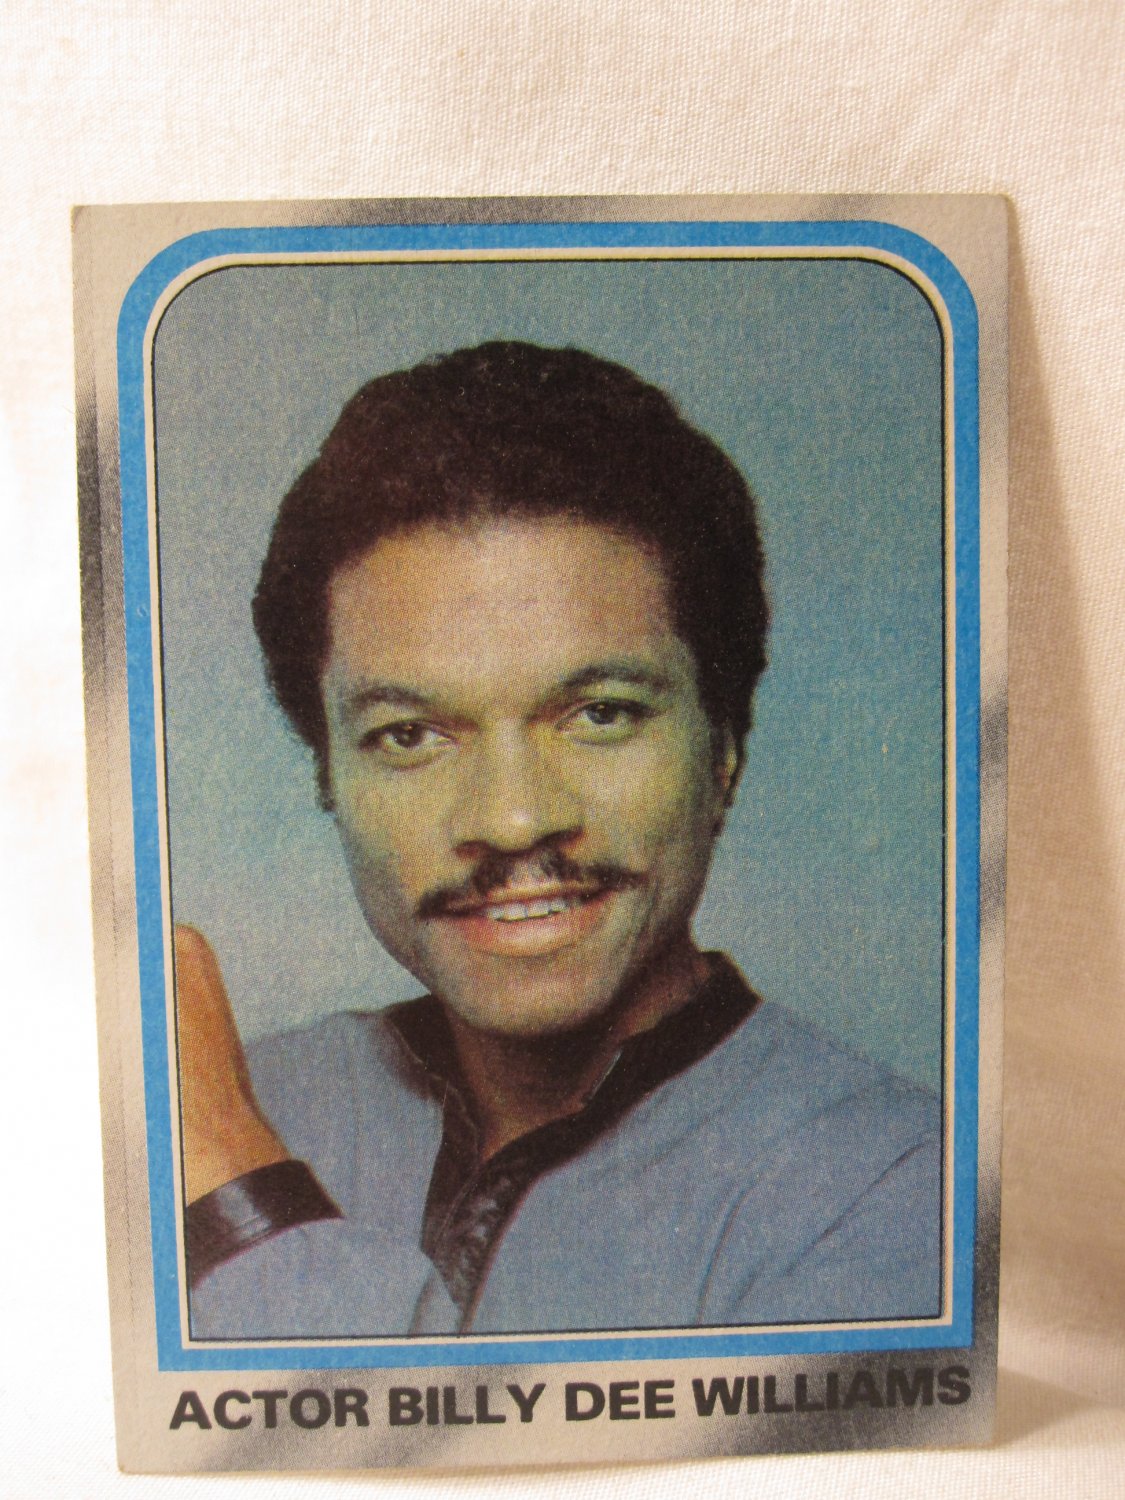 1980 Star Wars - Empire Strikes Back Trading card #231: Actor Billy Dee Williams